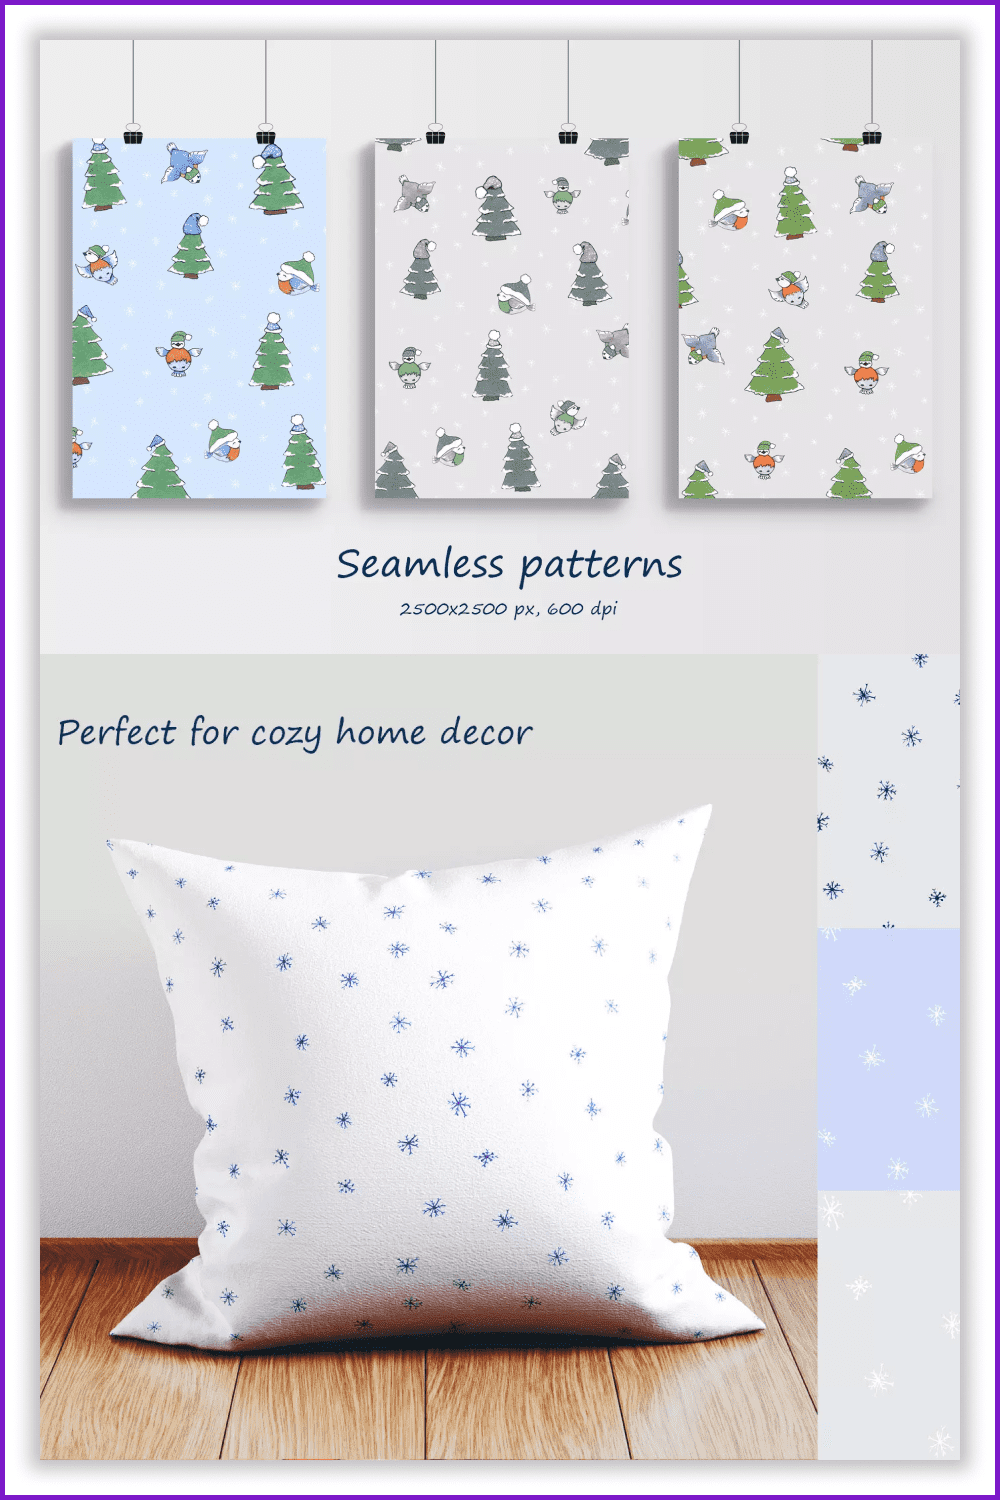 Collage of patterns with Christmas trees and snowflakes.